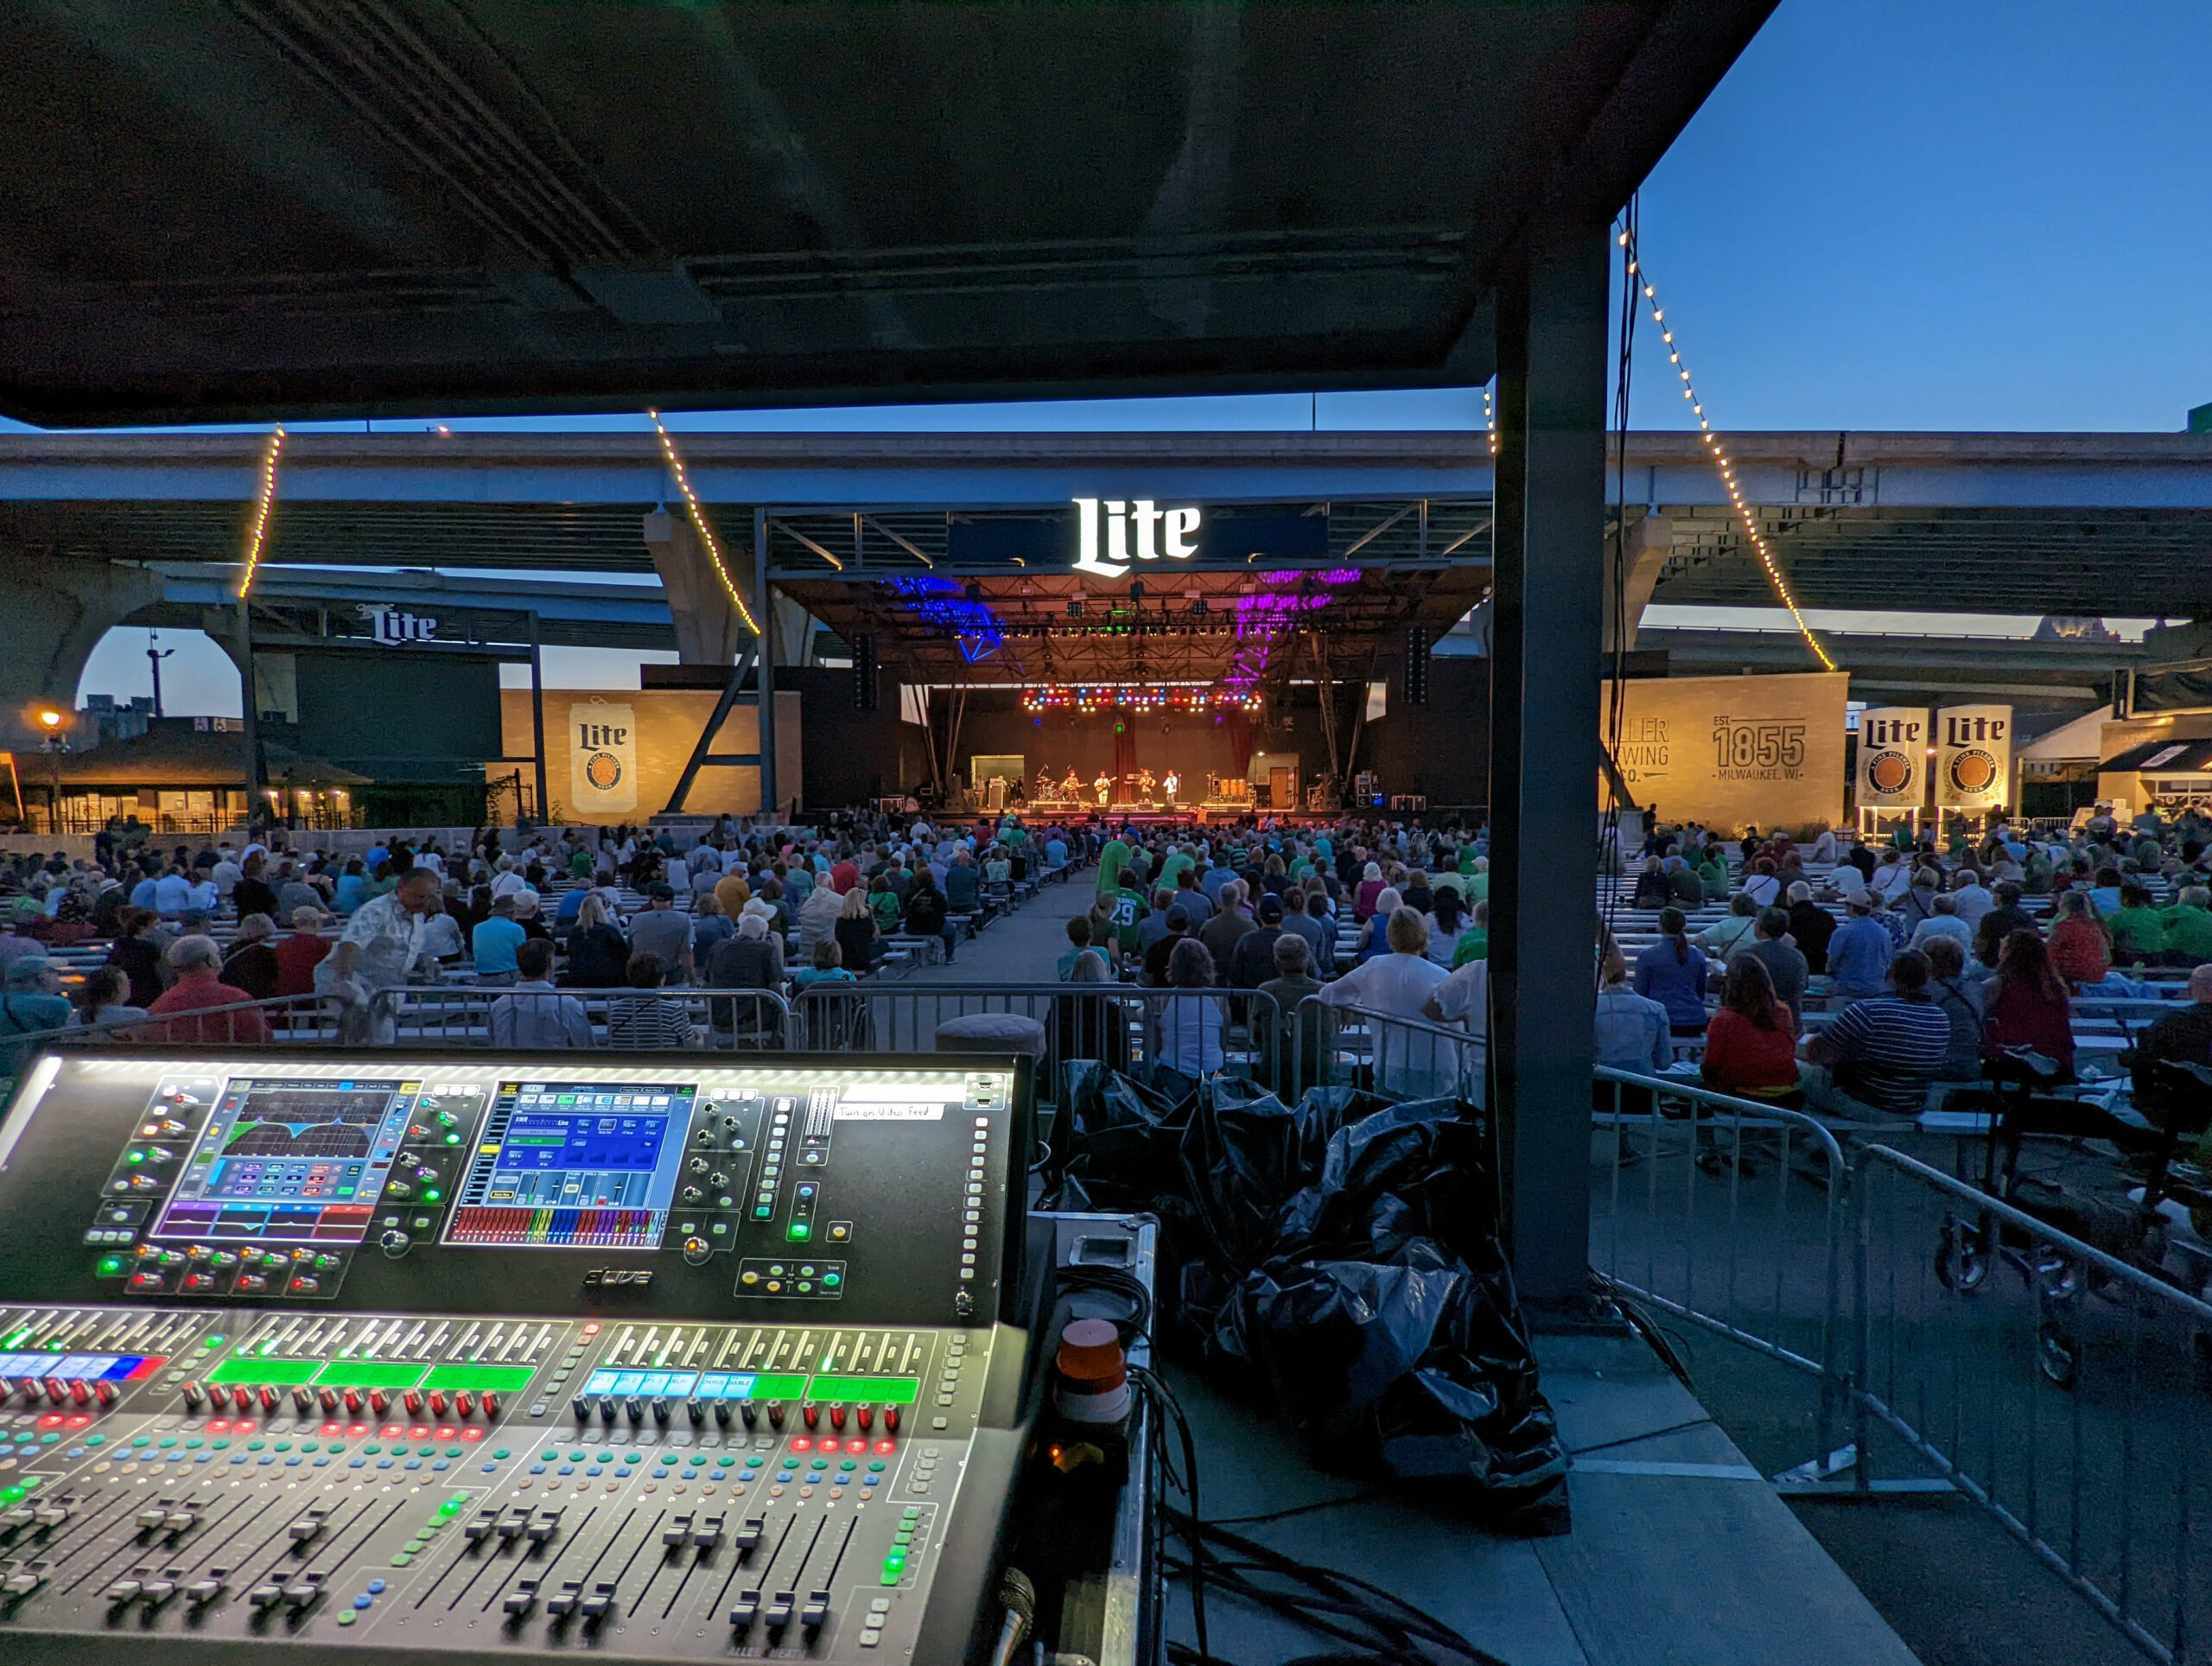 The Miller Lite stage was powered by a dLive S7000 surface at front of house